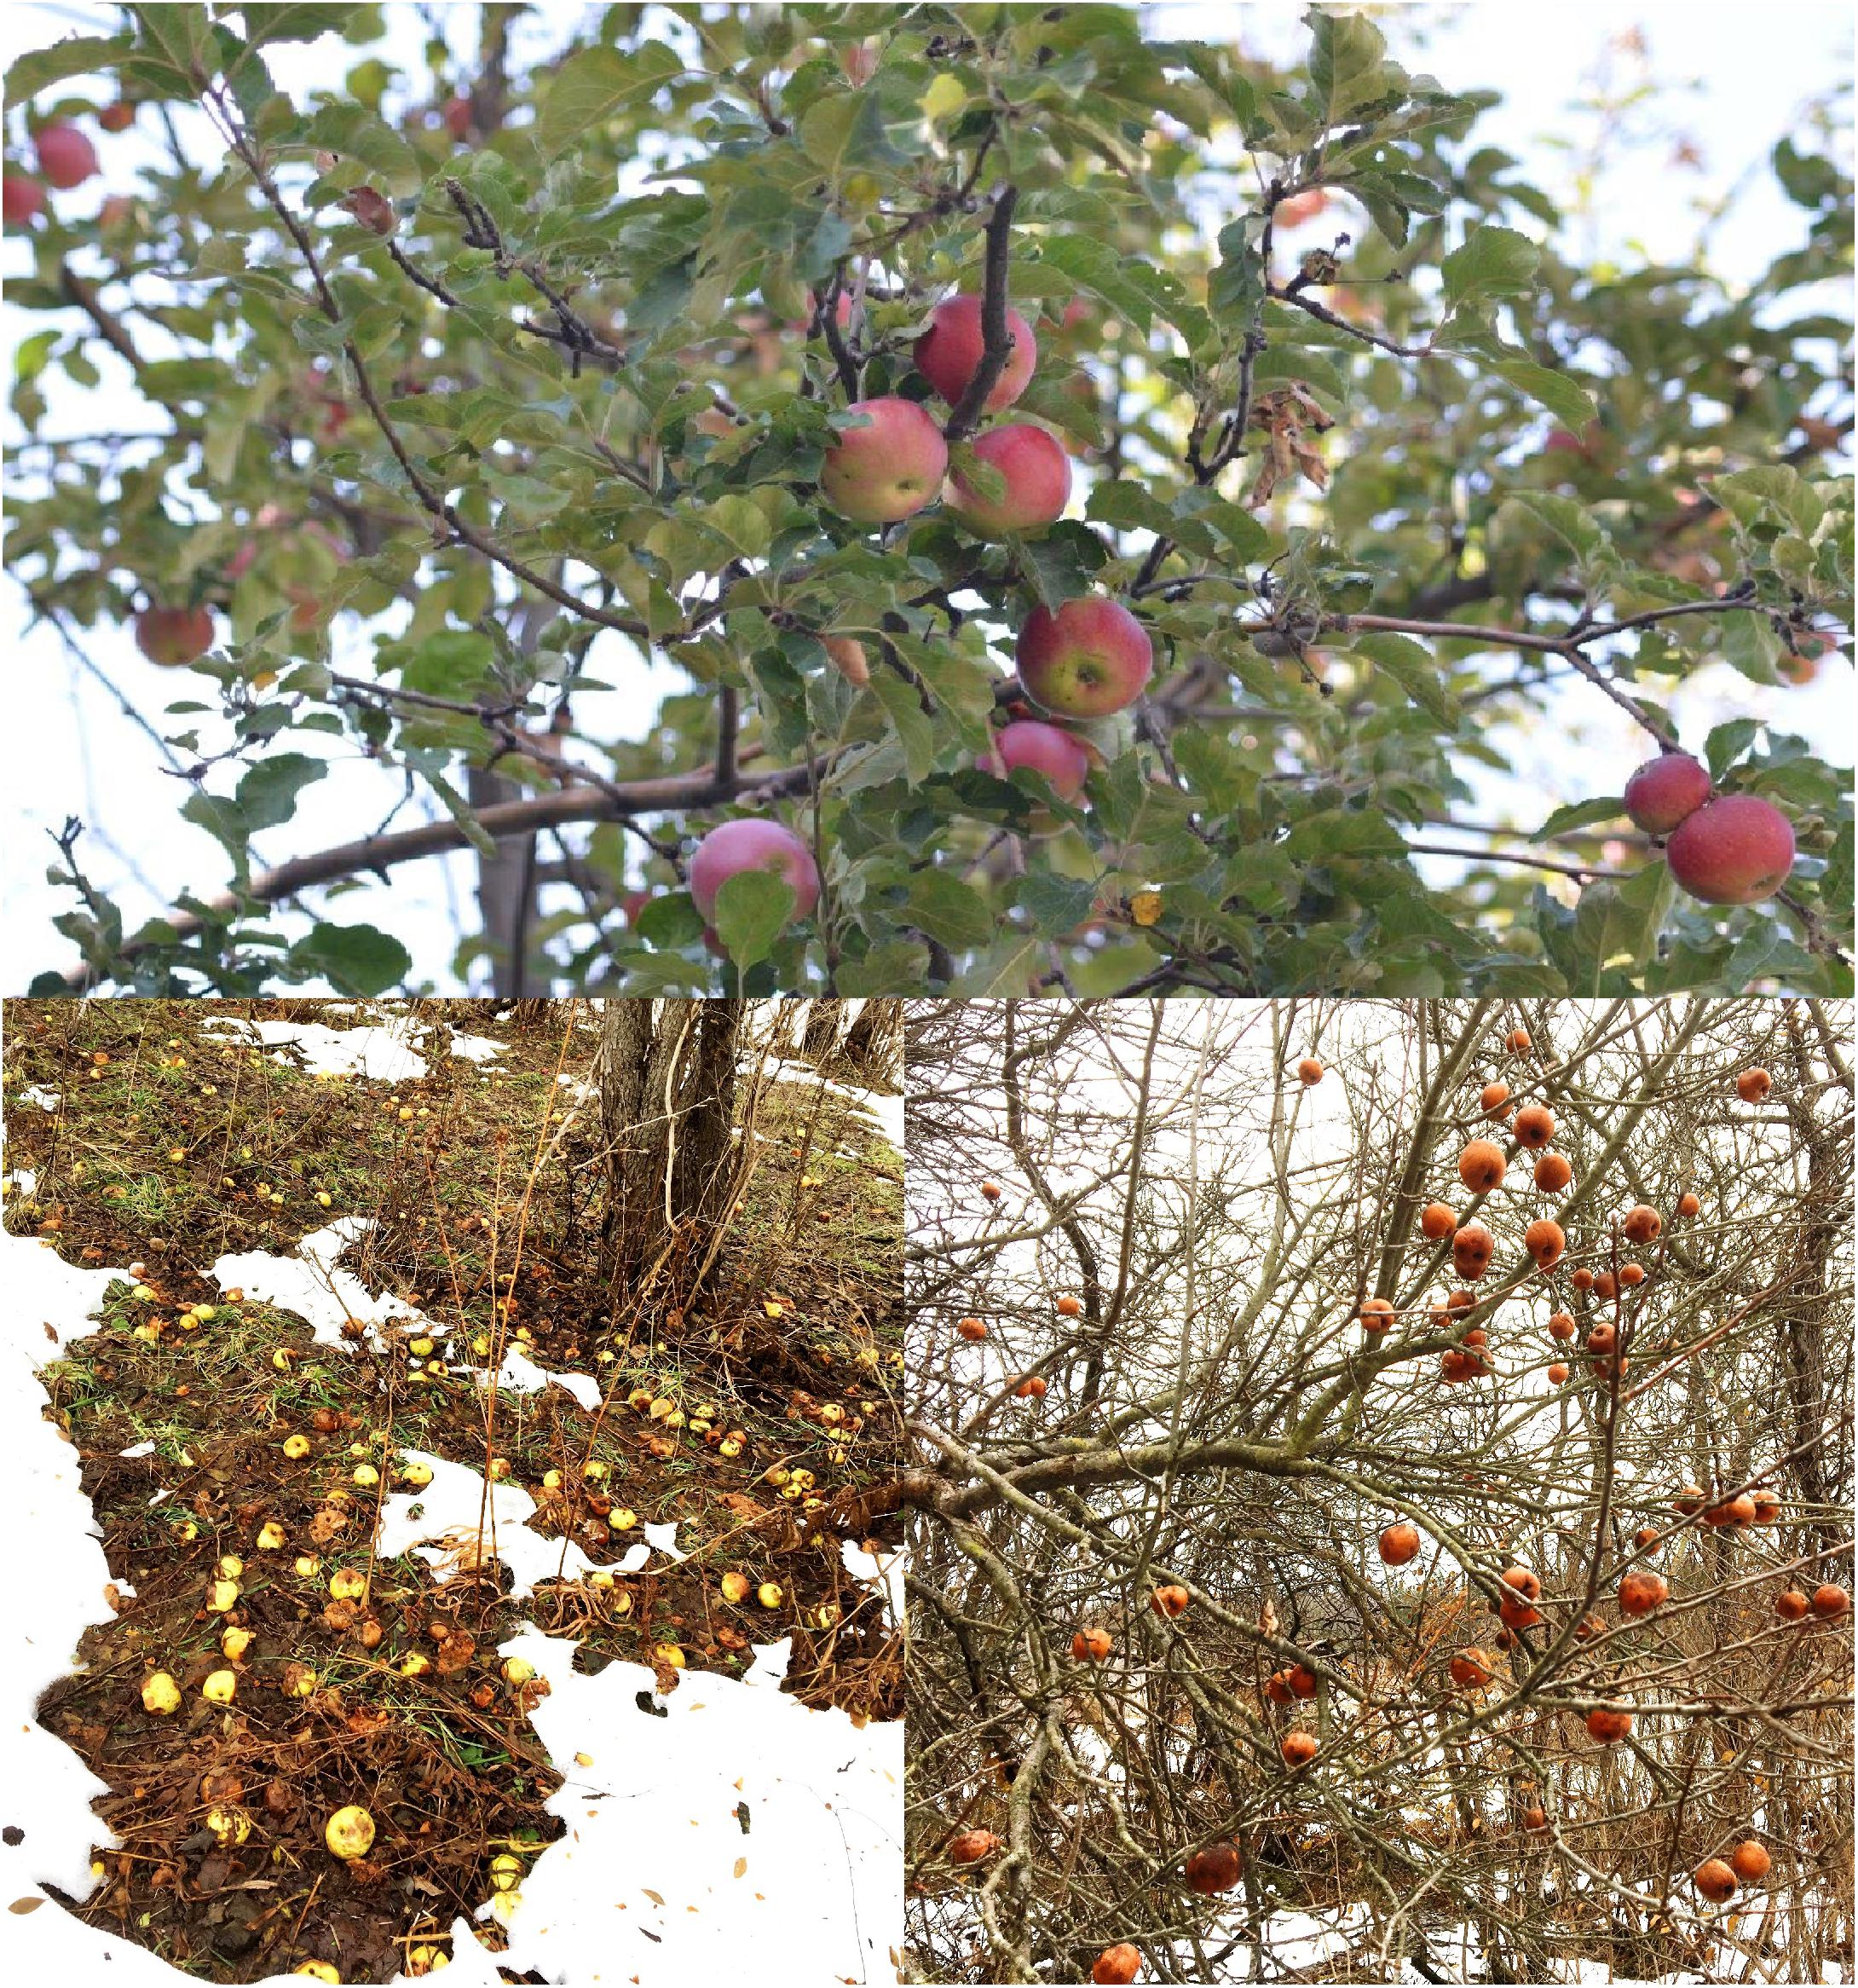 Cover crops in the apple peach and fruit orchard selected articles